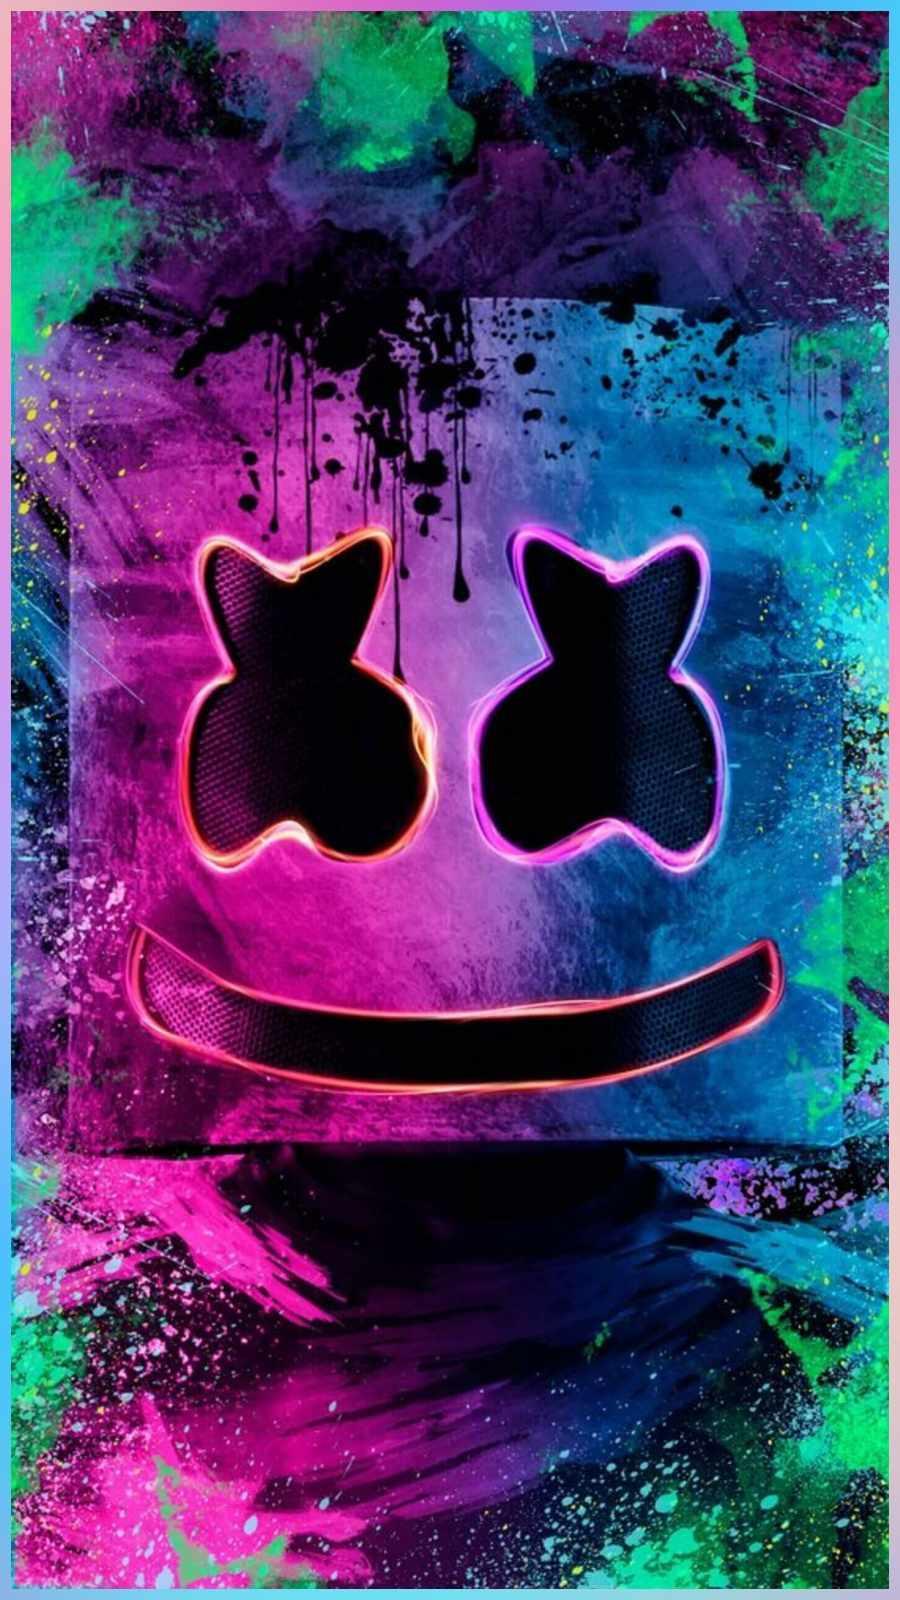 Marshmello Hd Wallpapers Best Dj Man Backgrounds For Android Apk Download